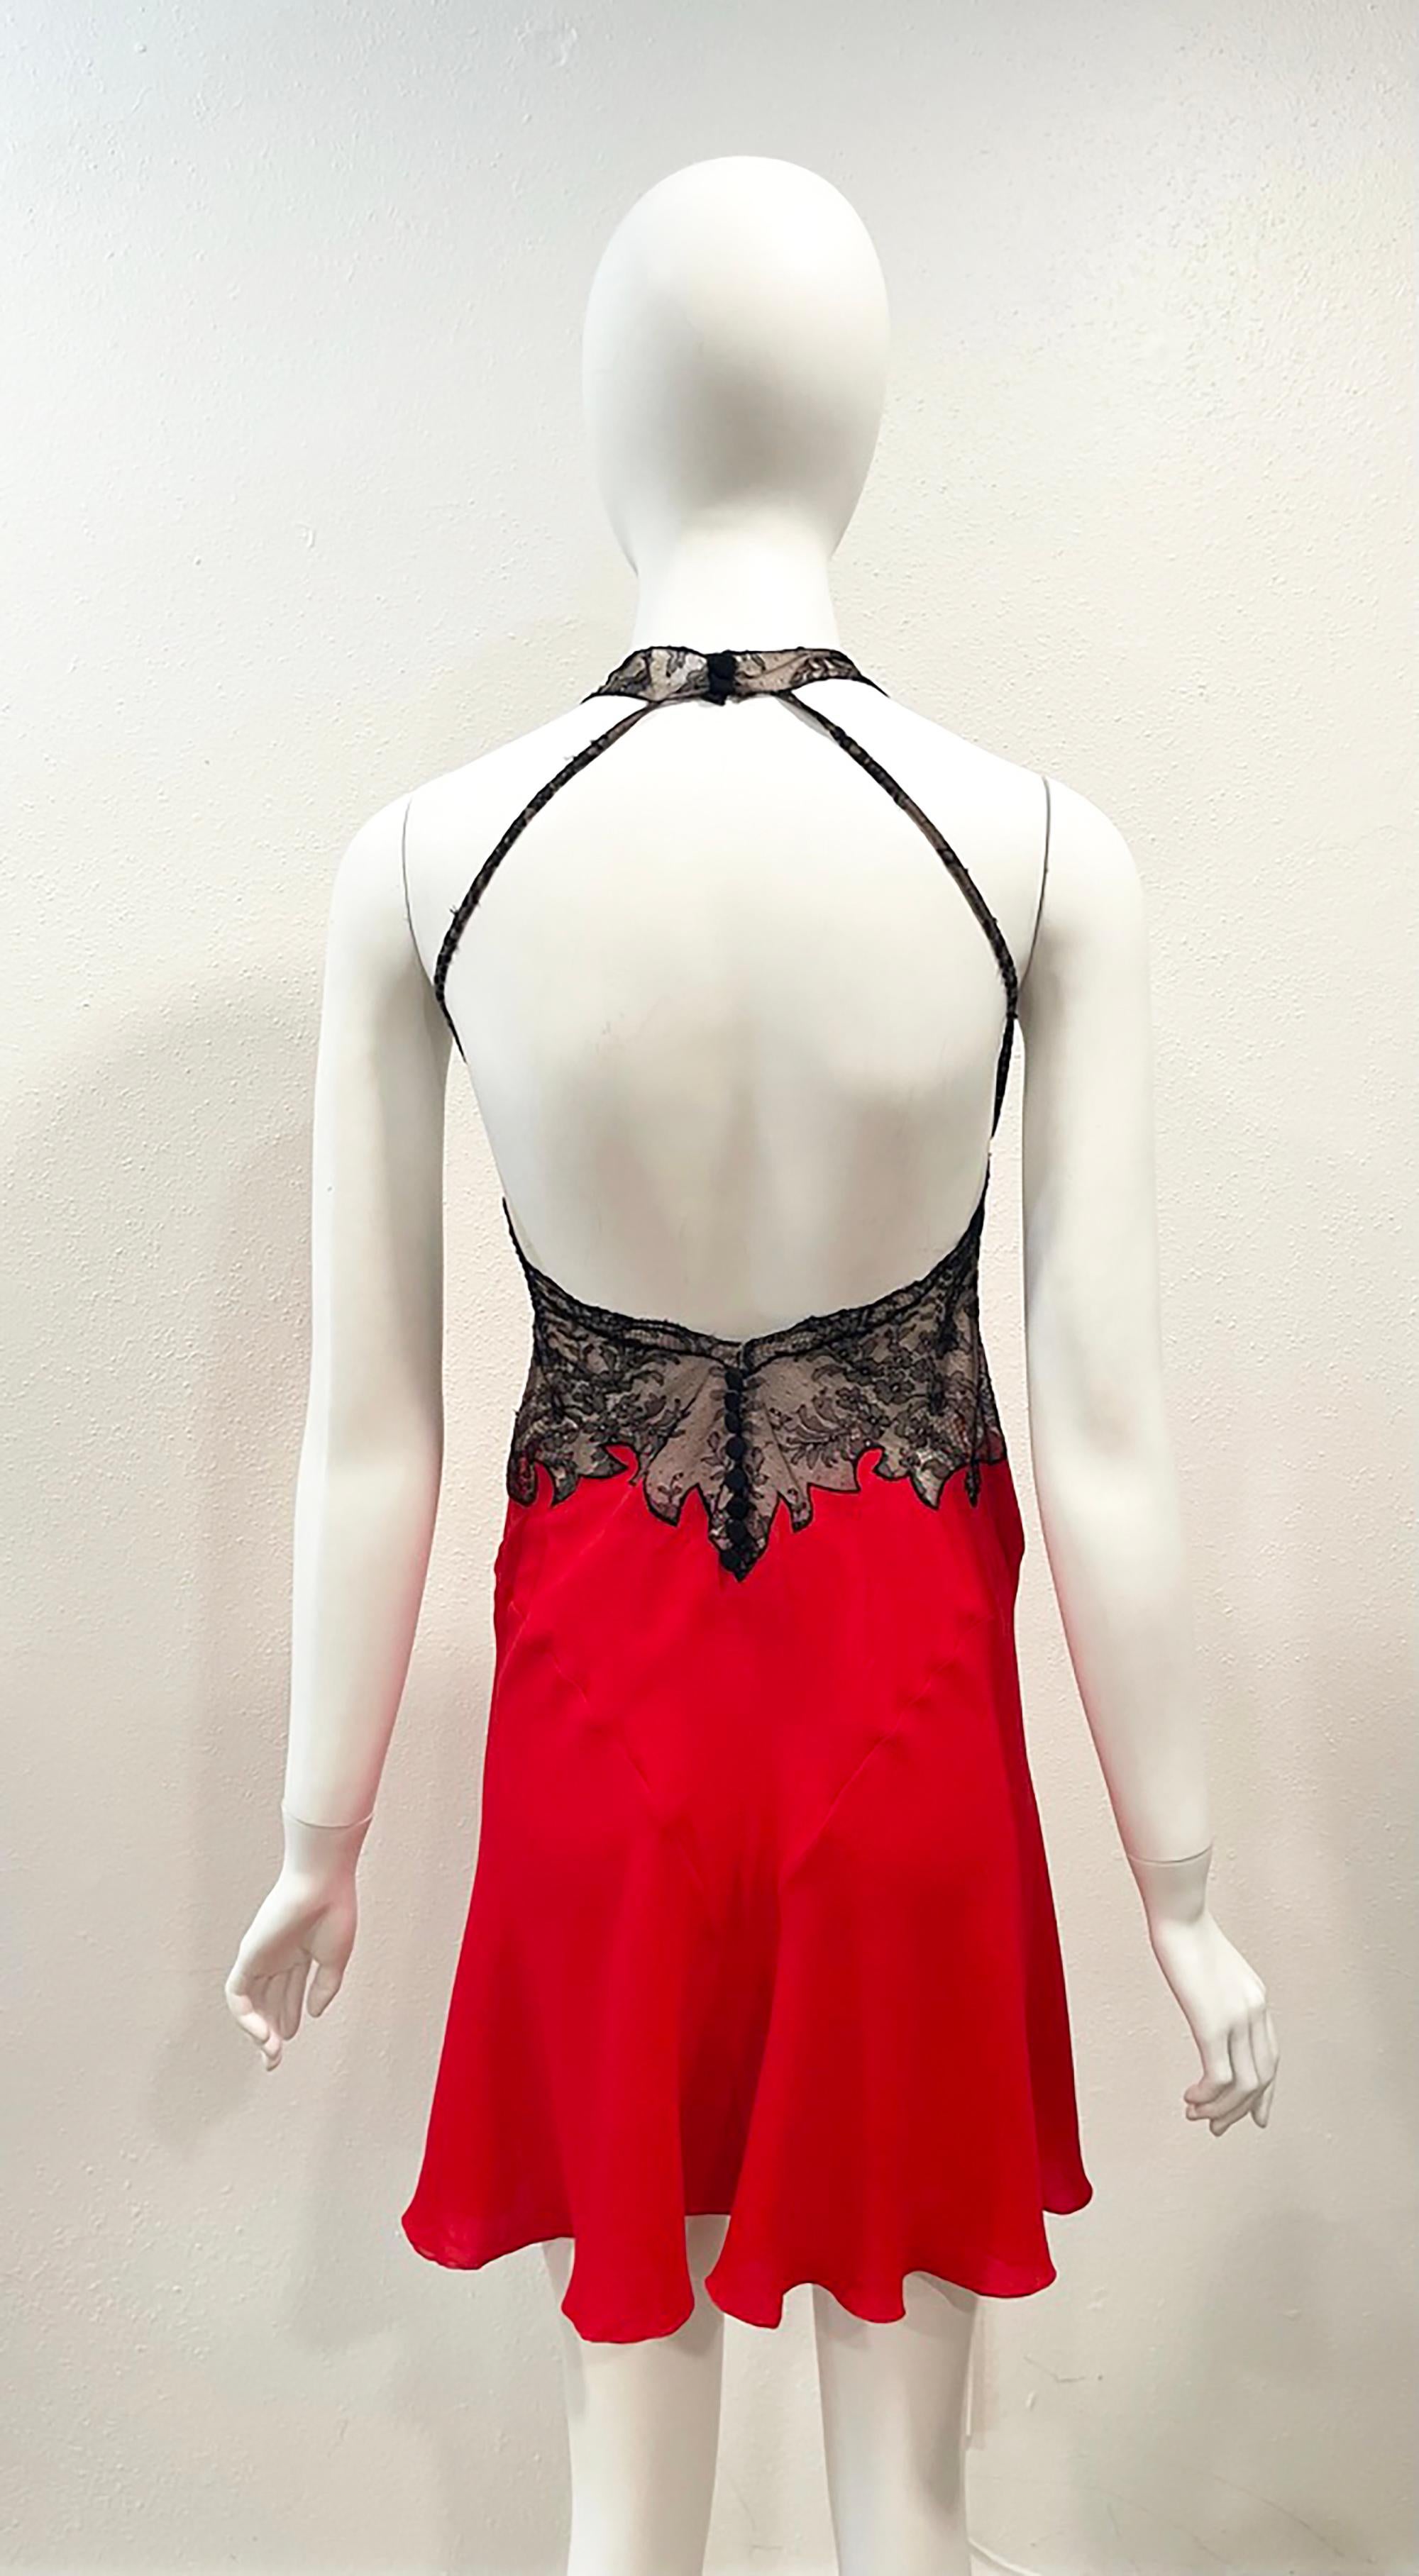 S/S 2002 Gianni Versace Red Mini Dress Sheer With Black Lace Trim
Condition: Excellent
Silk Blend
Made in Italy
SIZE: 40


Waist: 24